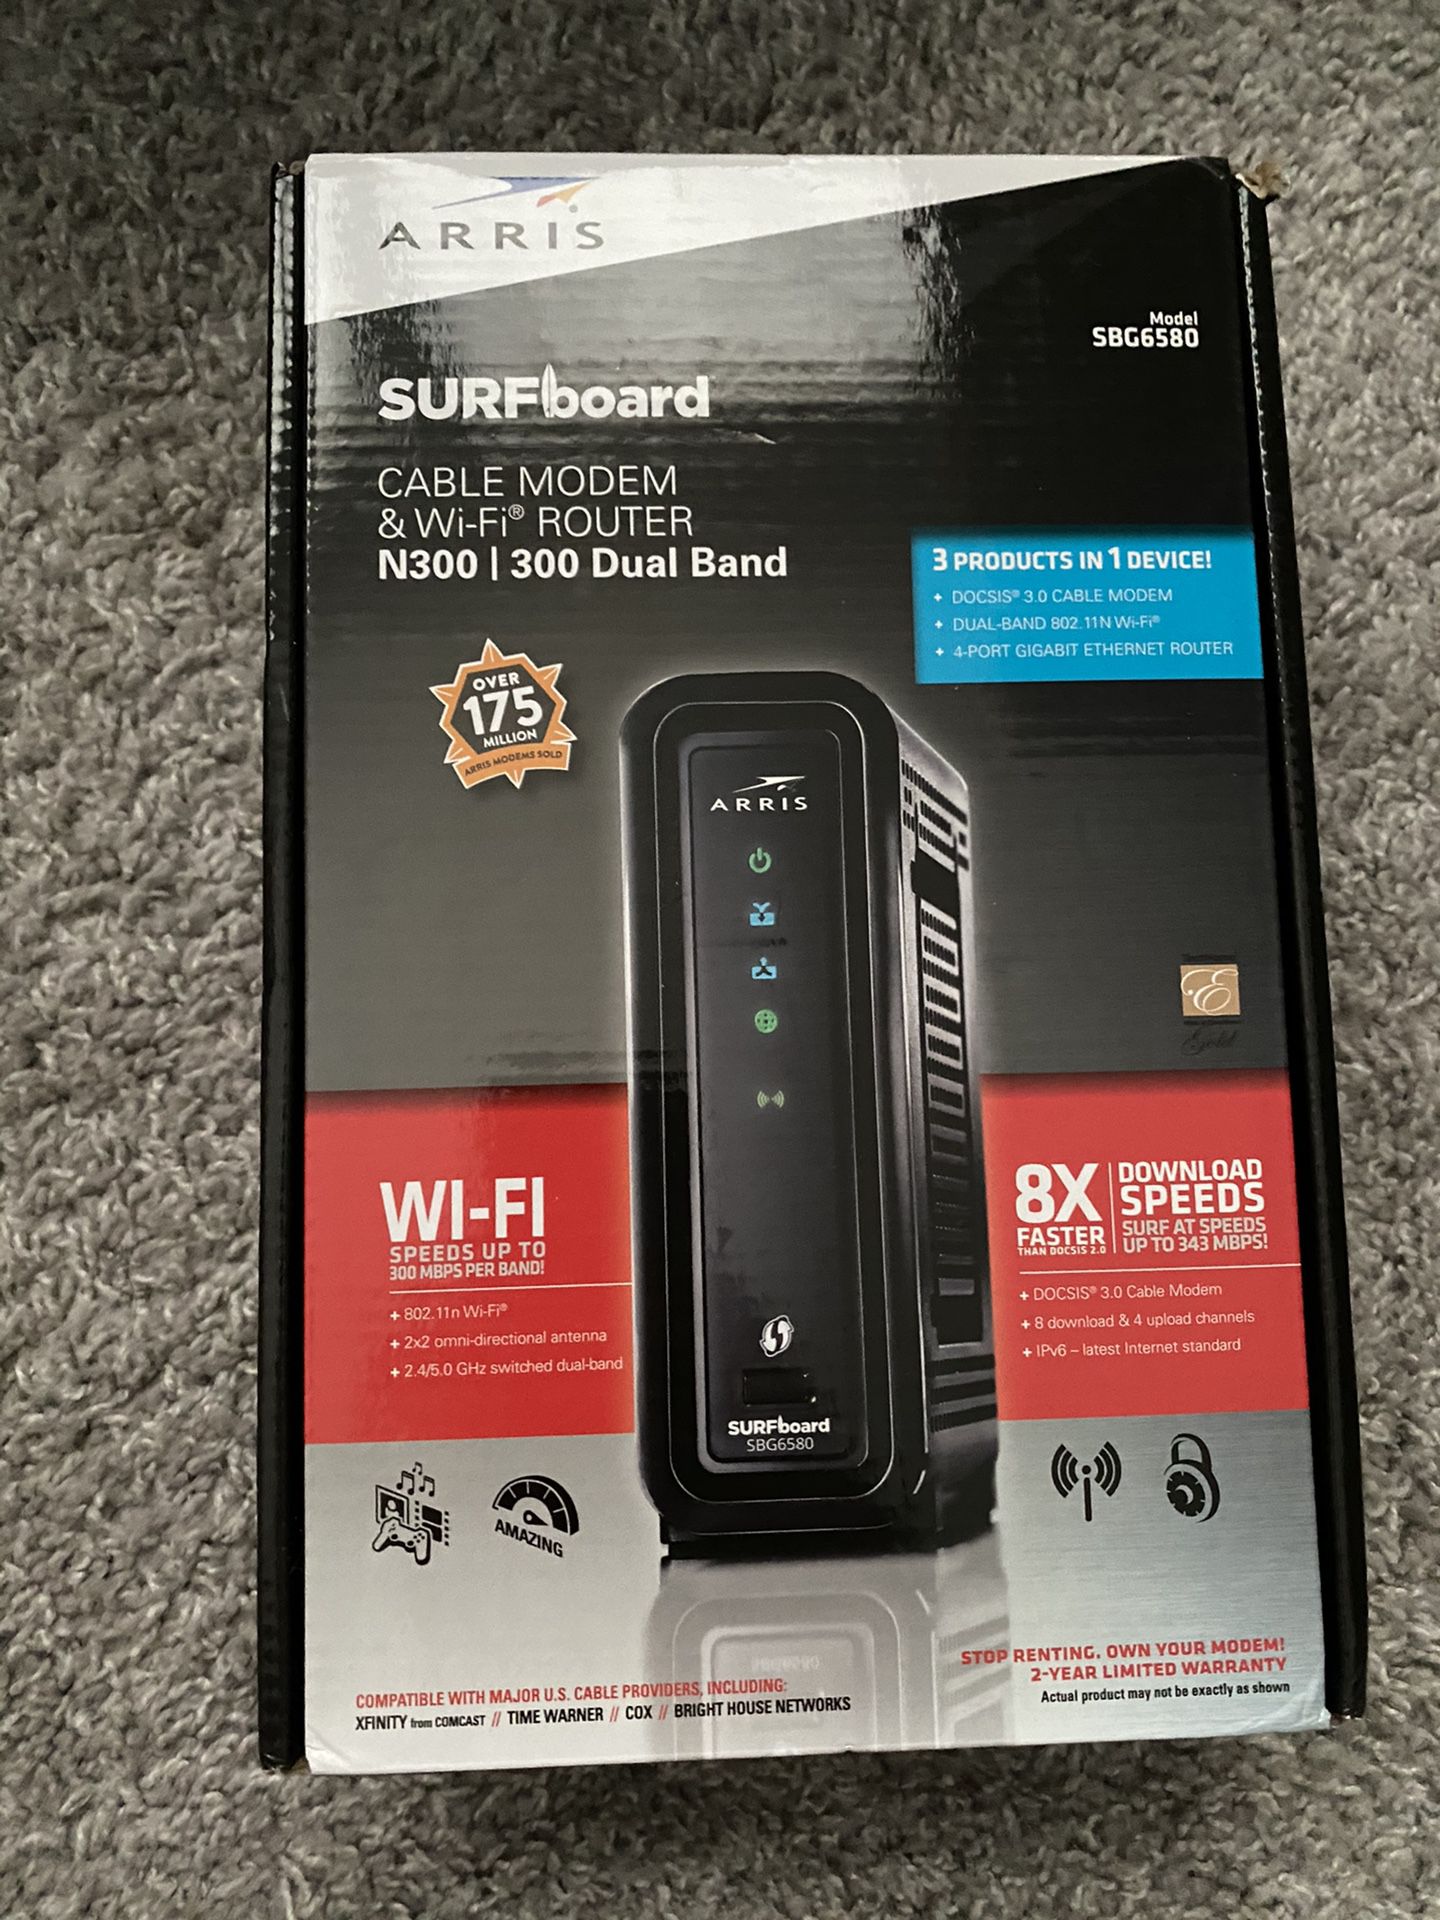 ARRIS SURFboard SBG6580 DOCSIS 3.0 Cable Modem/ Wi-Fi Dual Band Router